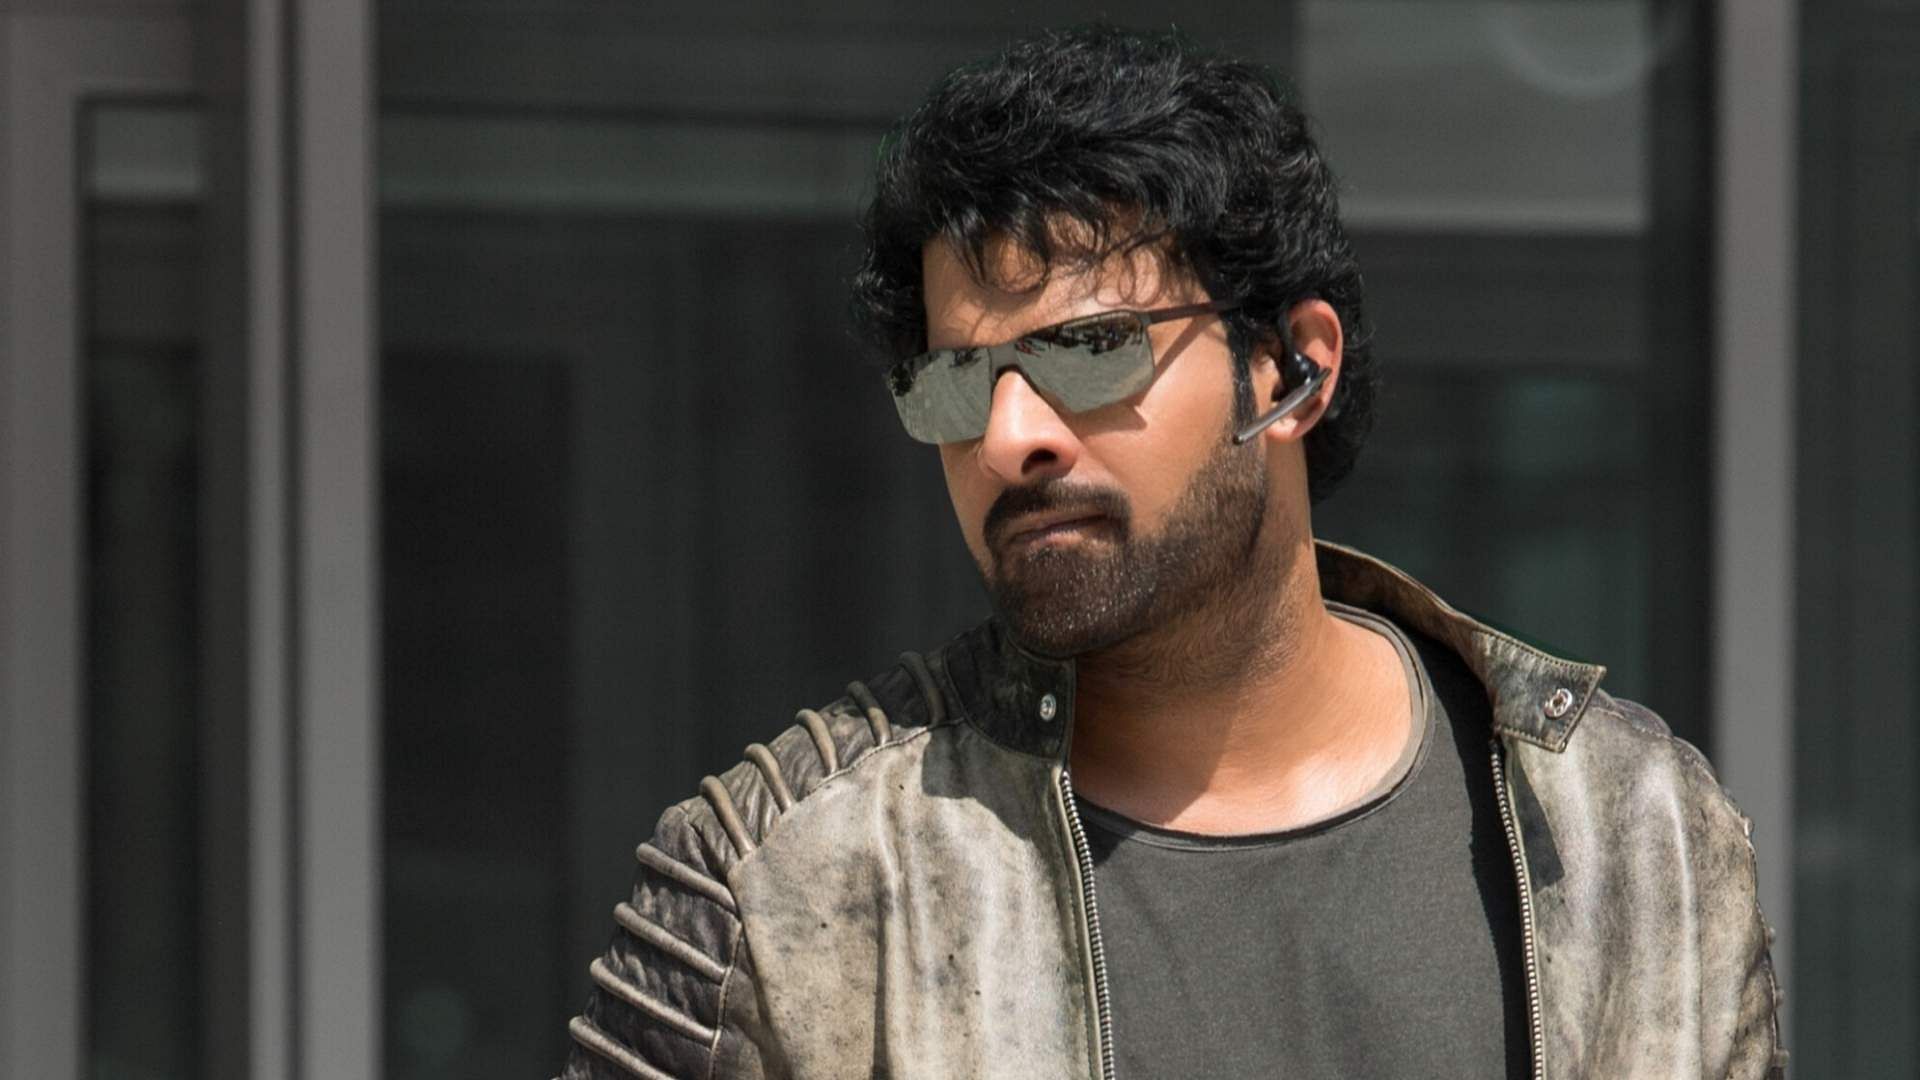 Prabhas is under self-quaratine after returning from a film shoot.